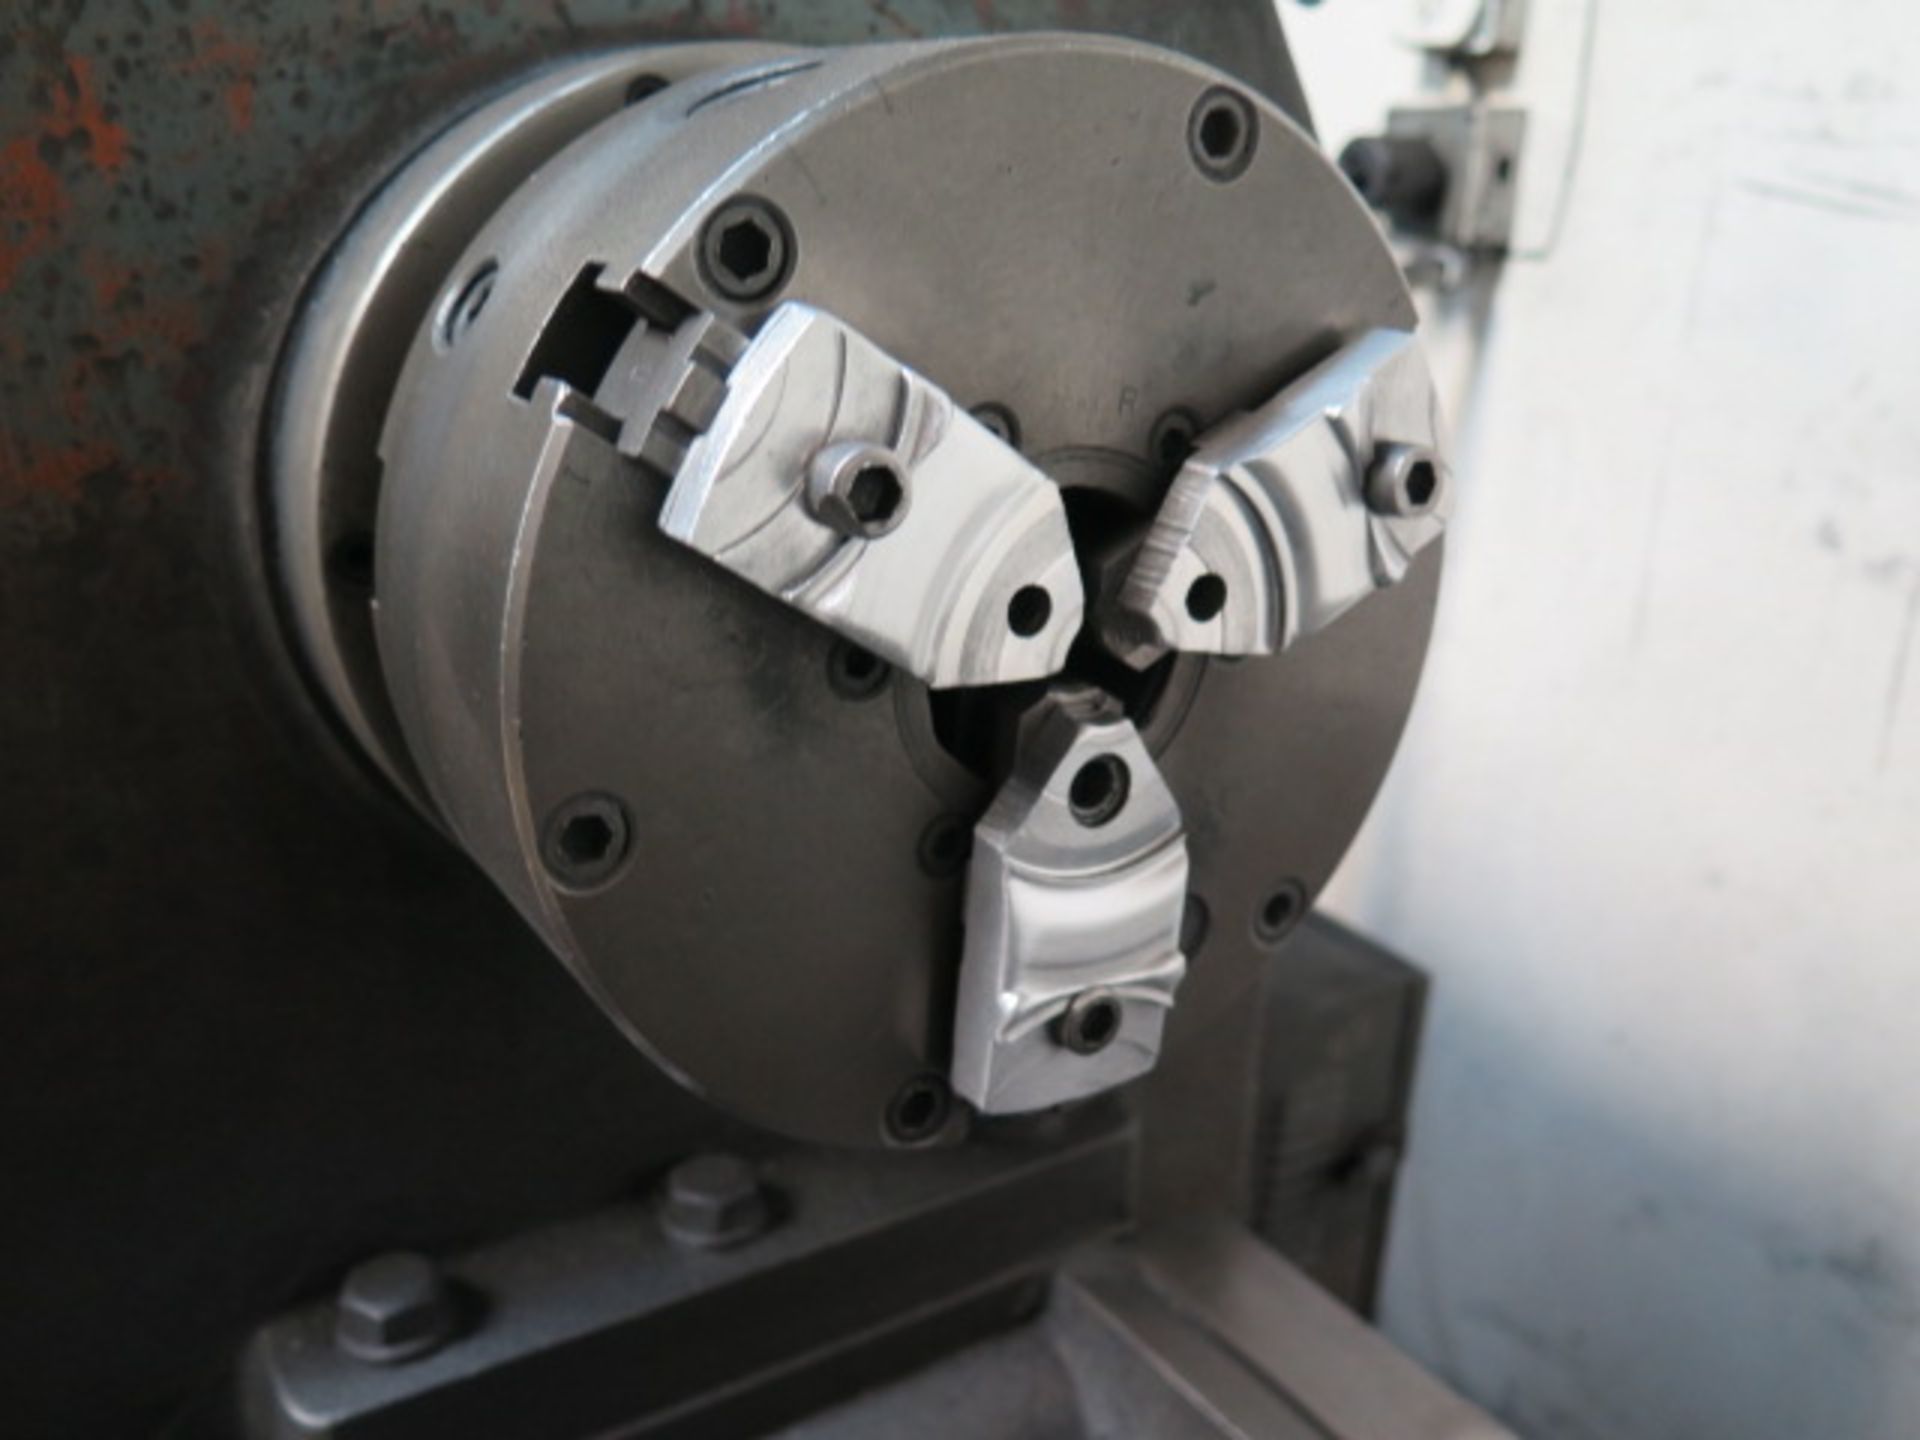 Japan Machinery Corp NL-20X60 20” x 60” Gap Bed Lathe w/Inch/mm Threading, Tailstock, SOLD AS IS - Image 7 of 20